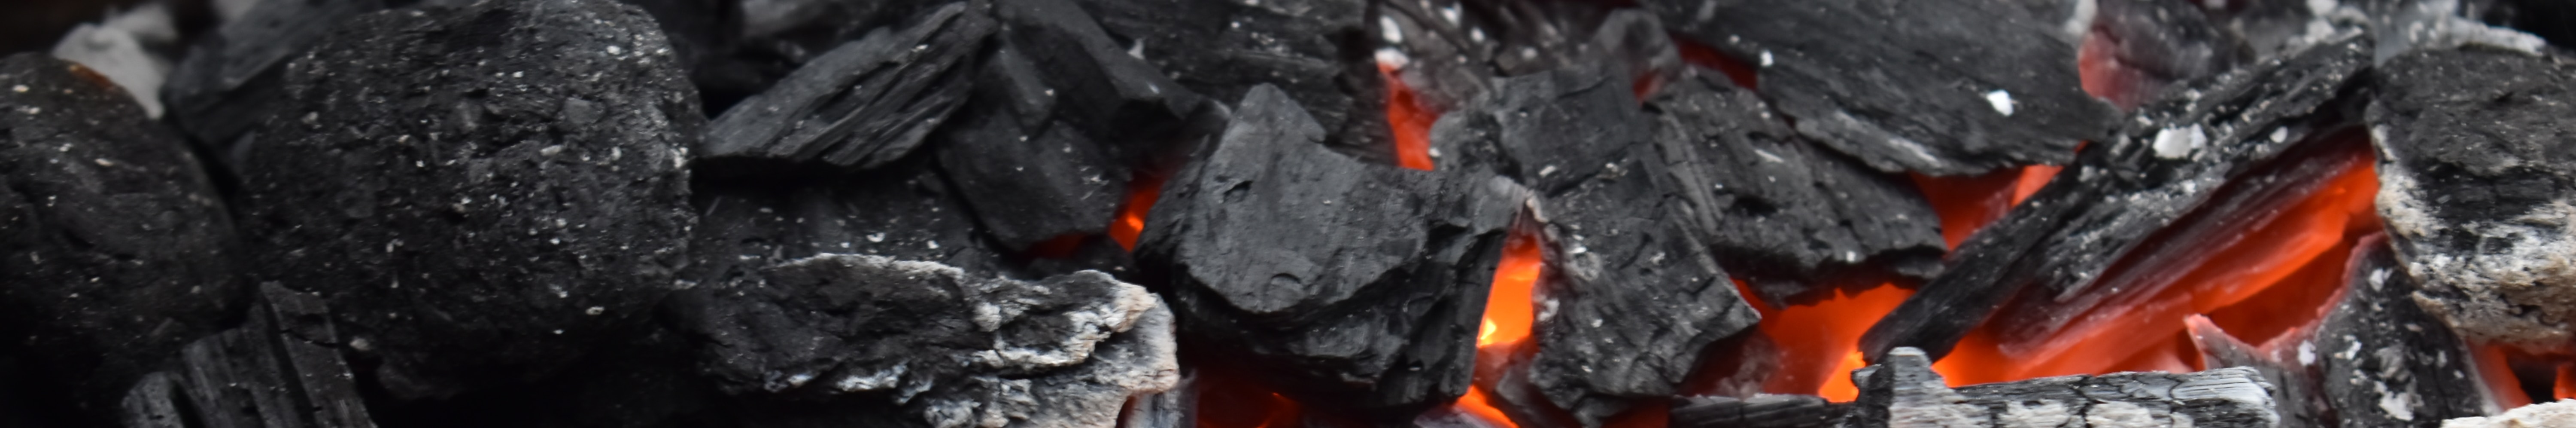 In 2021 Oge Energy generated 177,025 t of coal ash waste